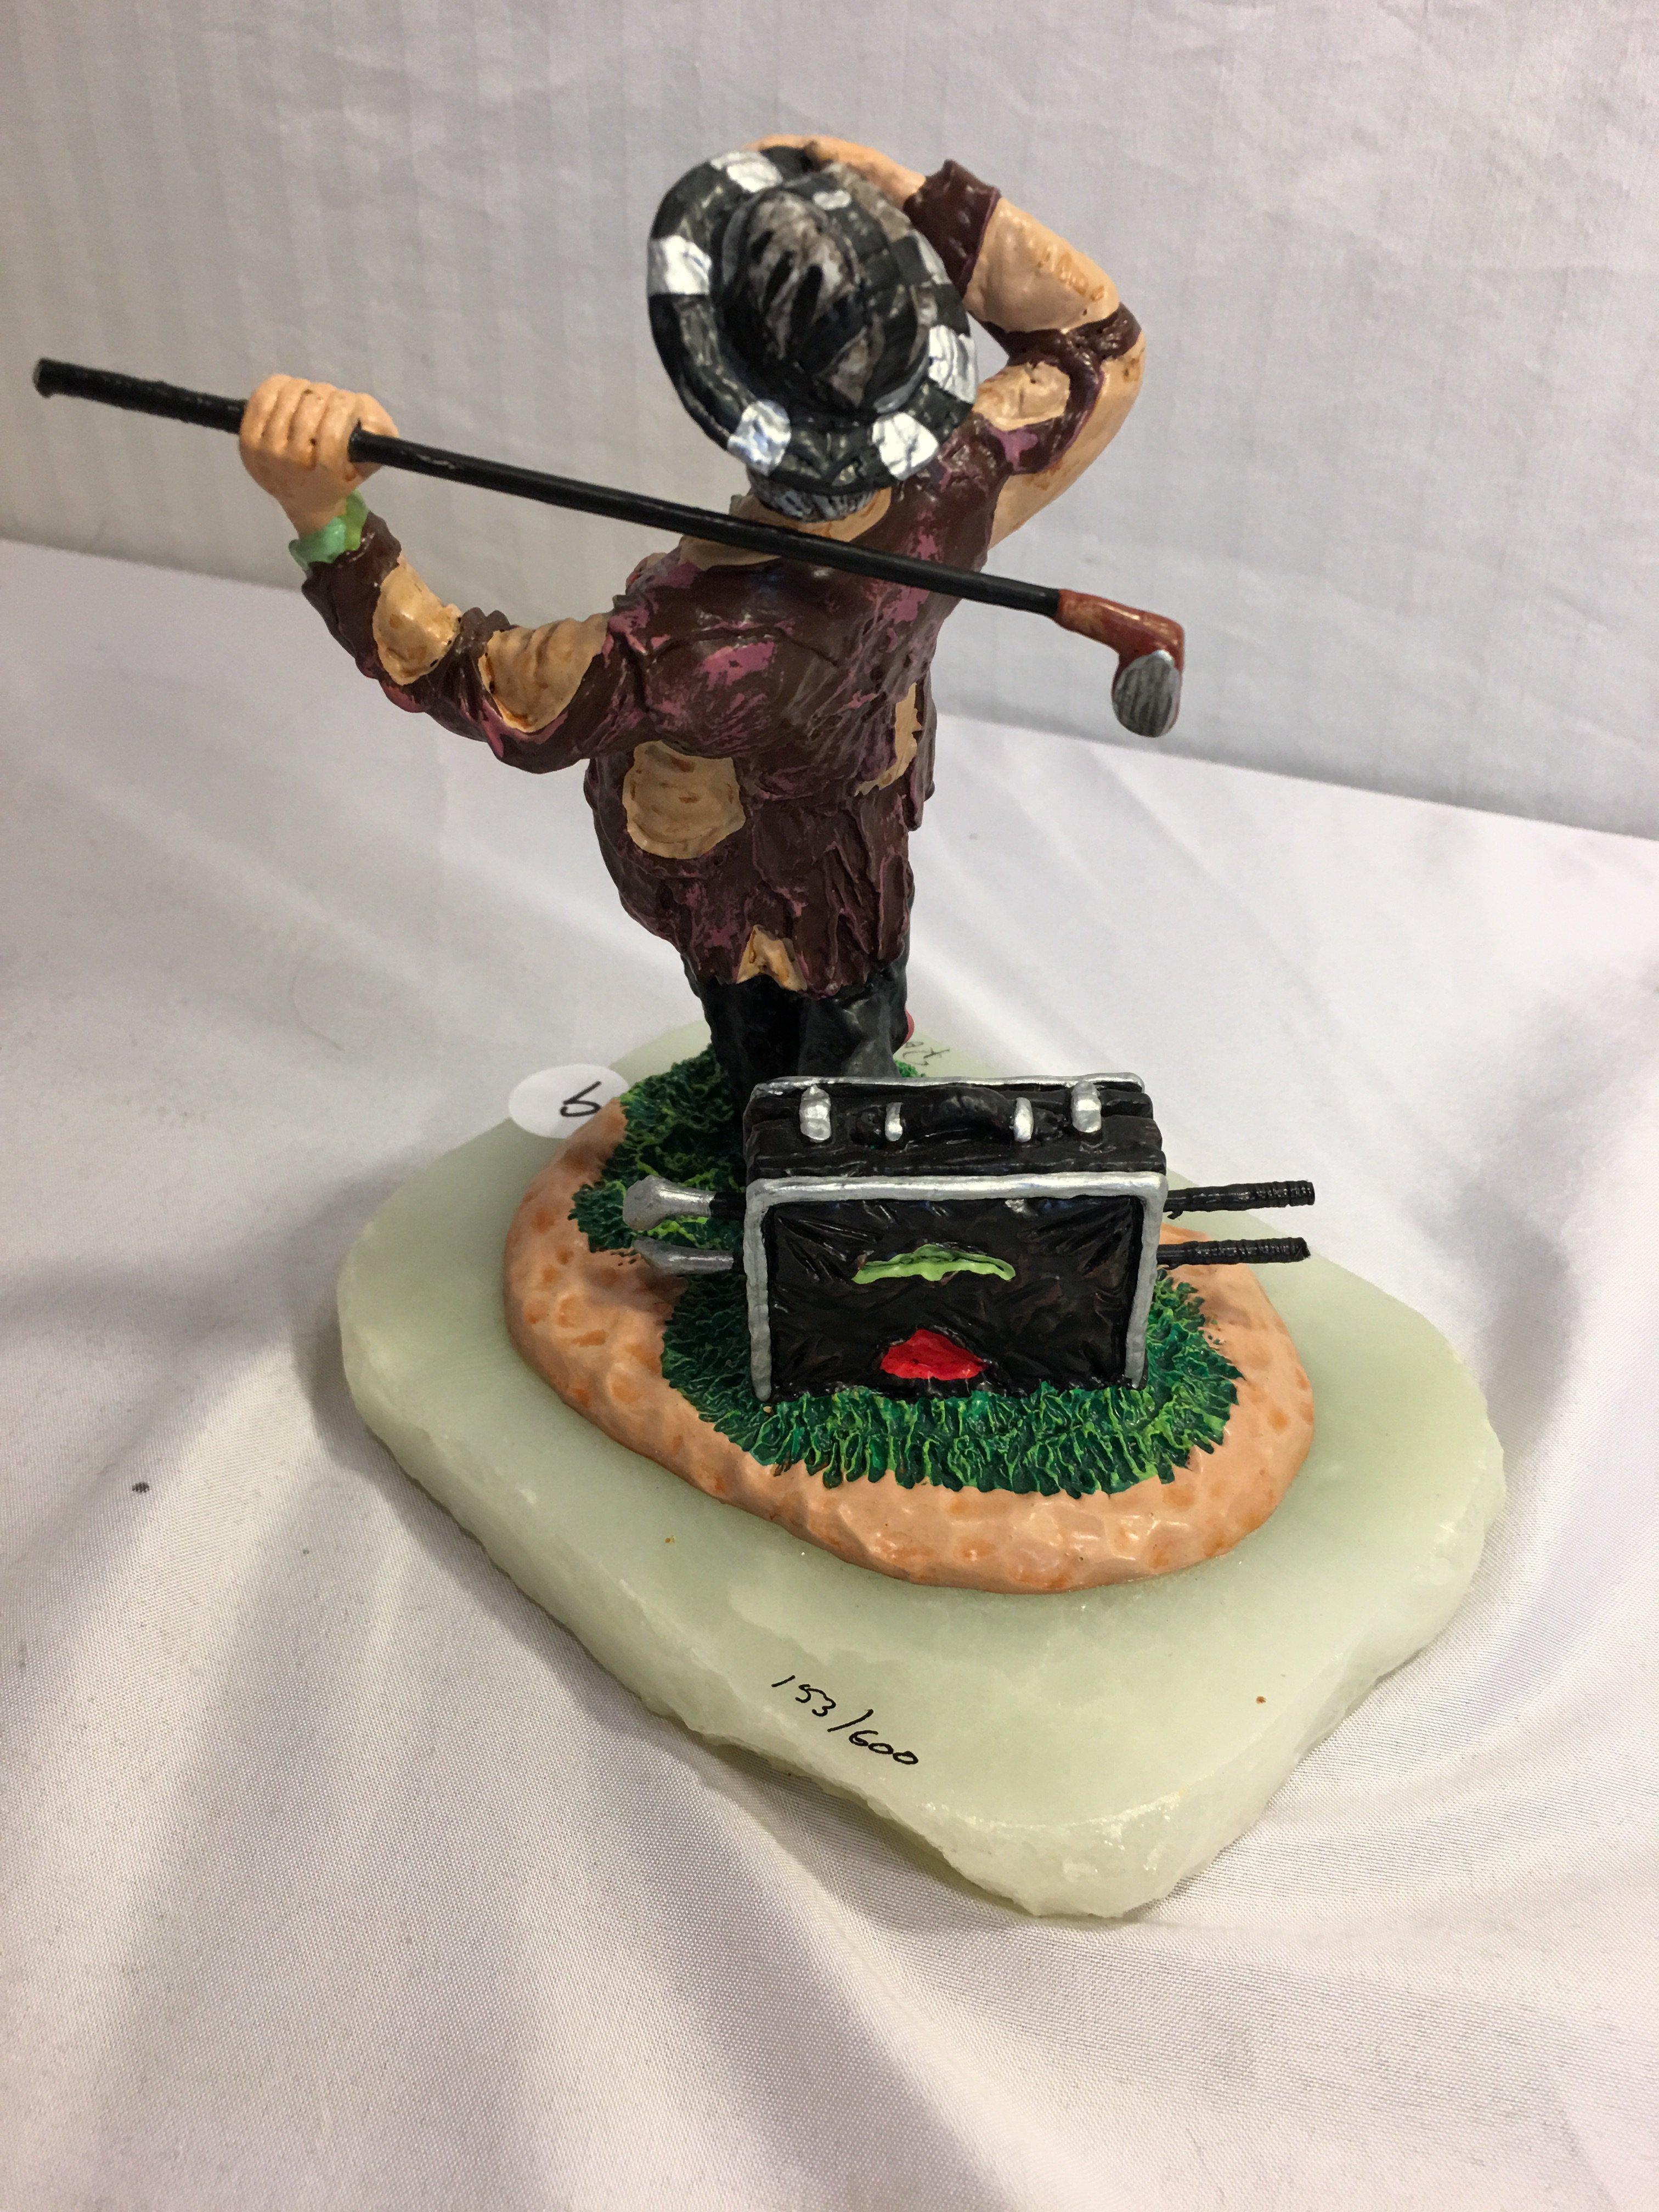 Collector 2009 Ron Lee's World Of Clown Sculpture Golfing Figurine Size: 6"Width by 7" tall Figrine